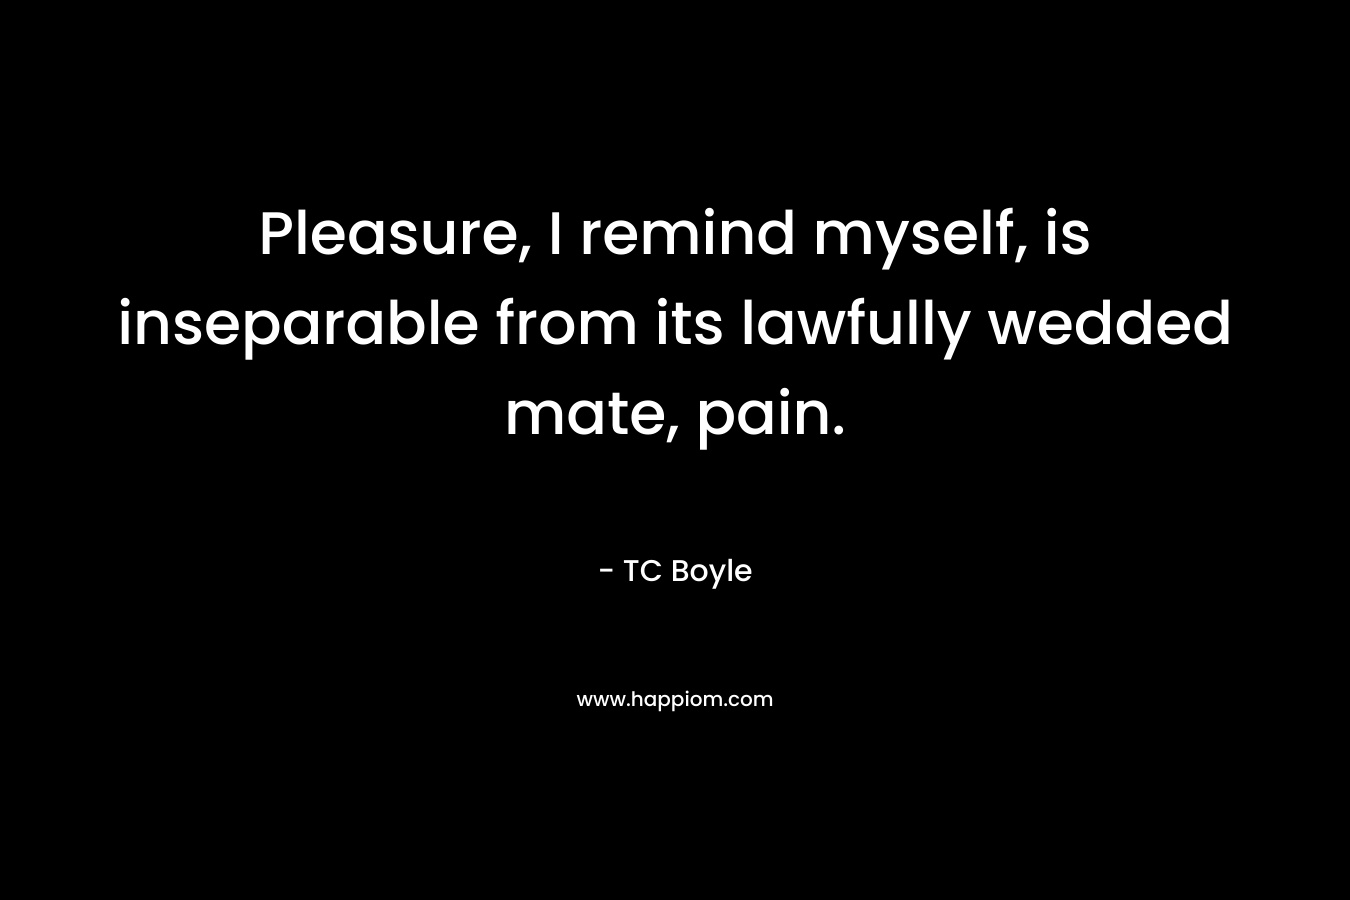 Pleasure, I remind myself, is inseparable from its lawfully wedded mate, pain.